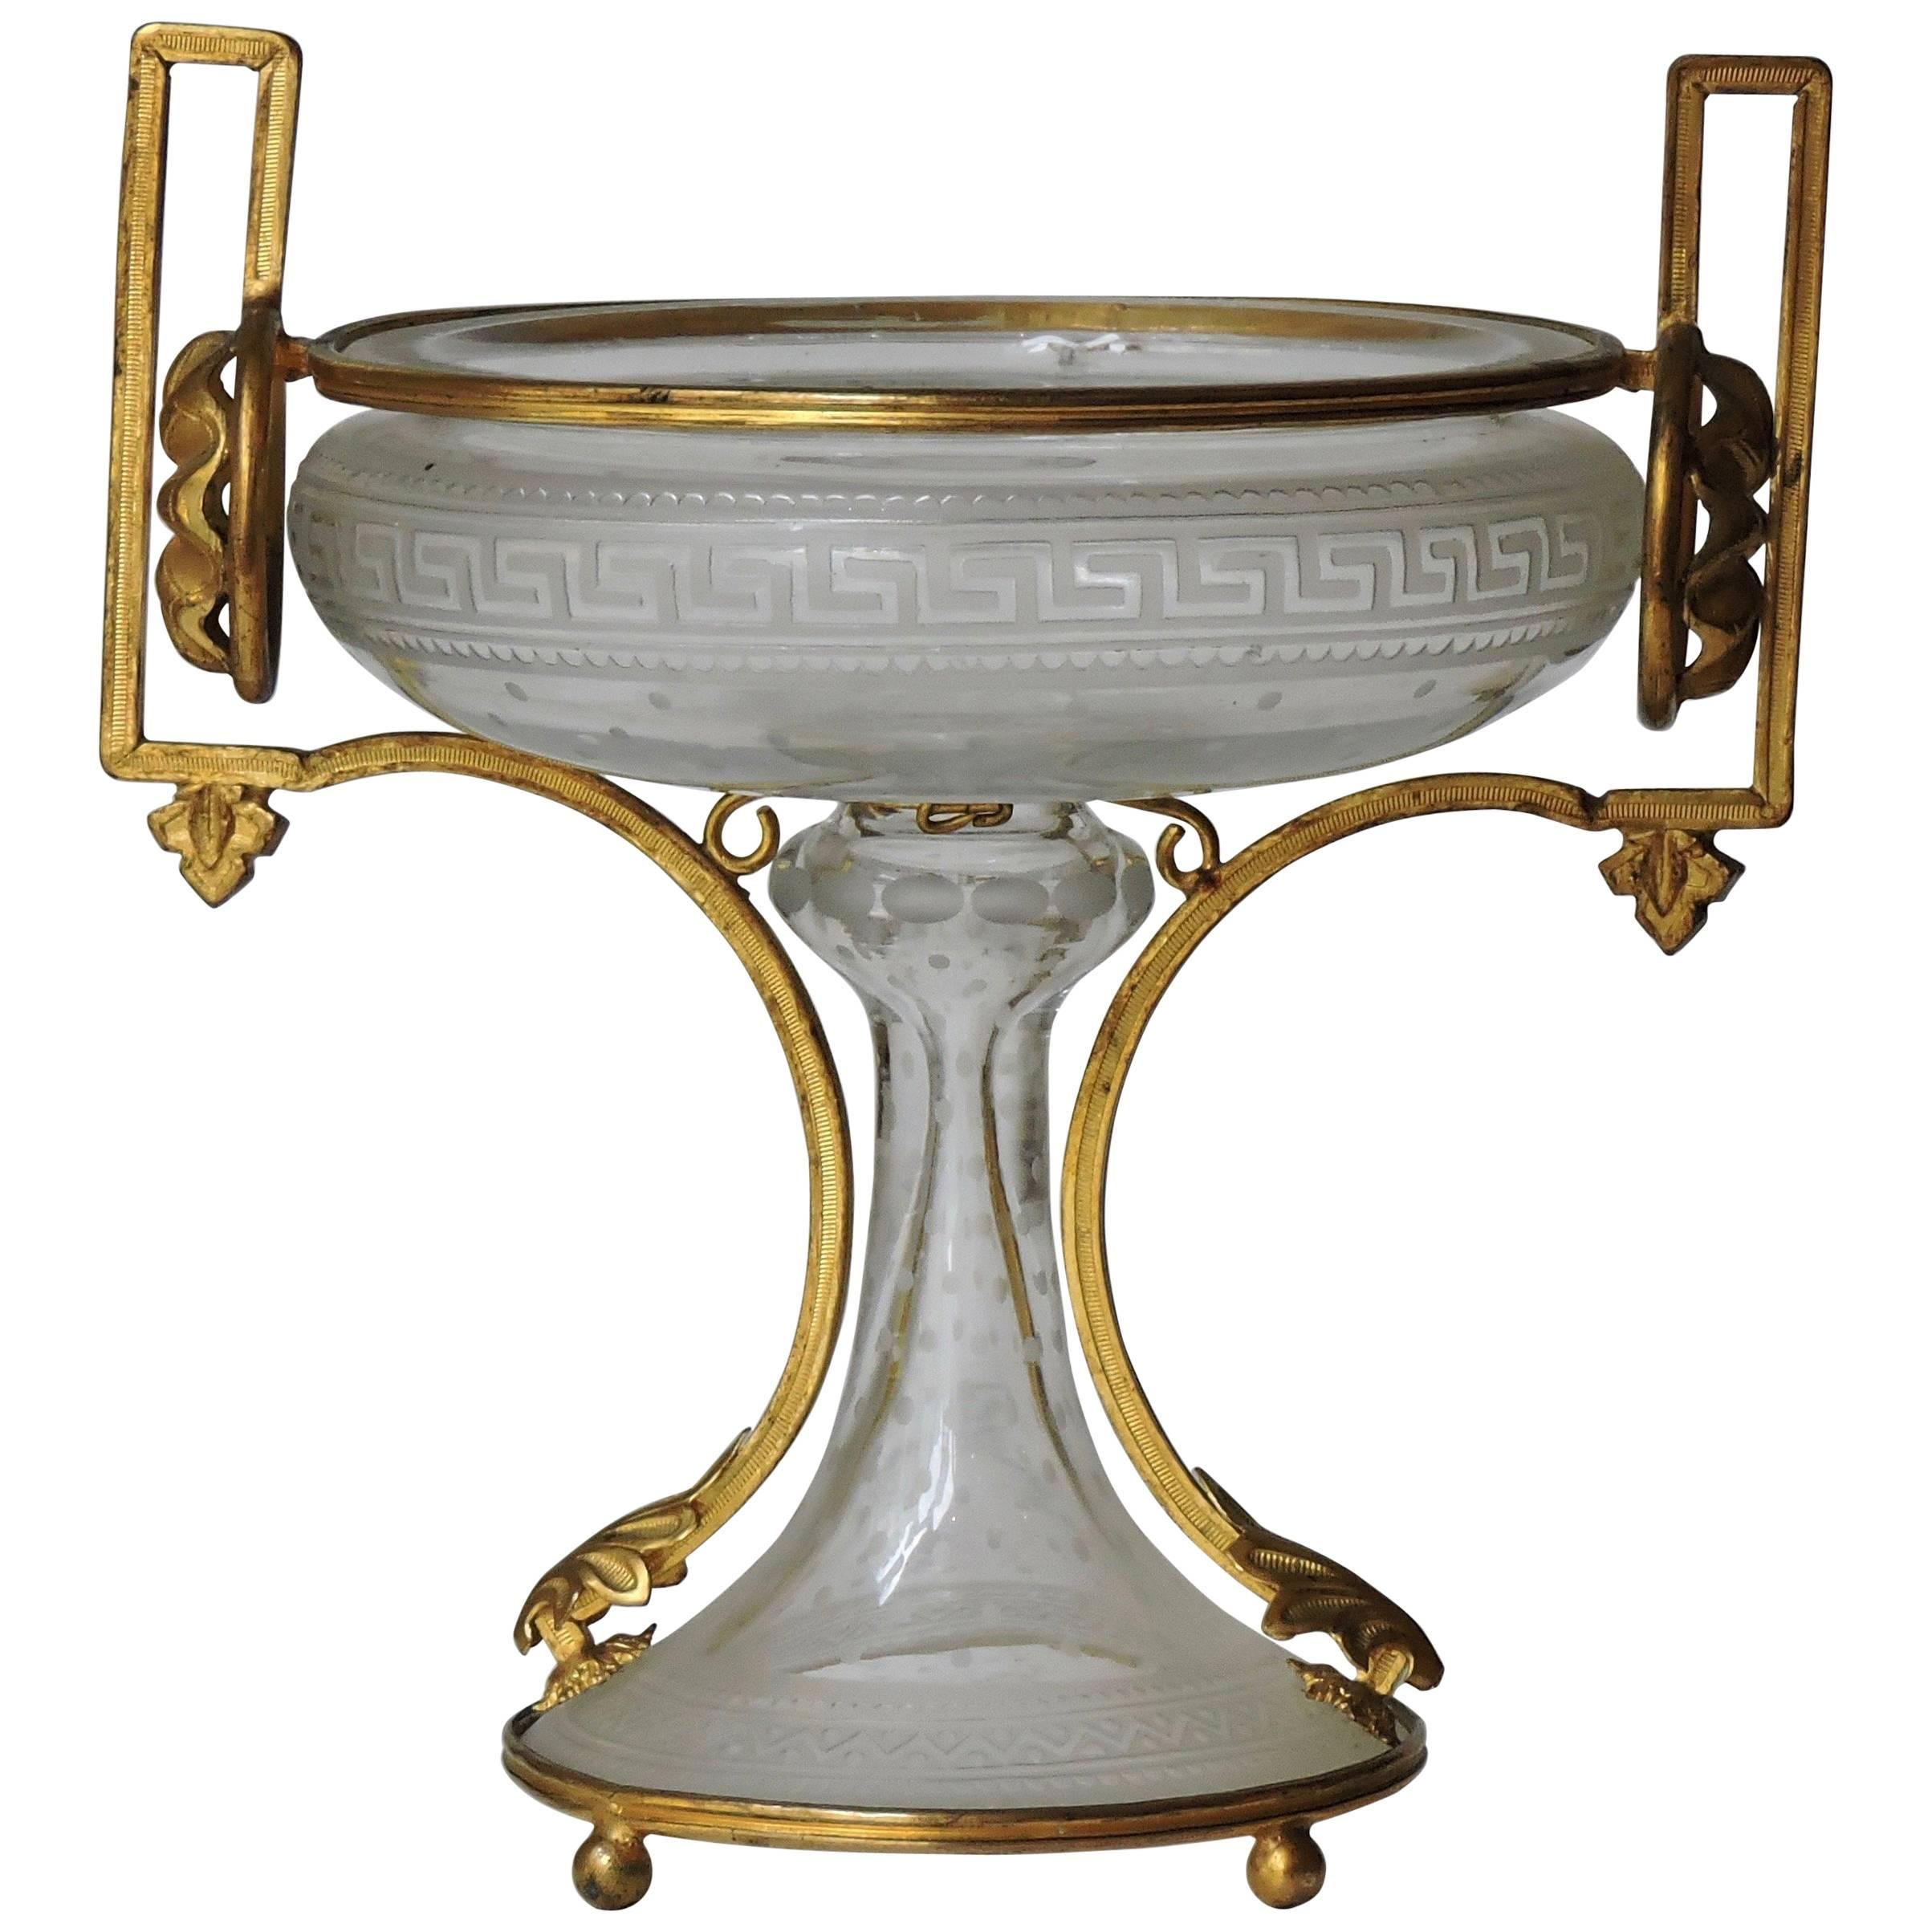 Neoclassical Engraved and Ormolu-Mounted Crystal Cup, circa 1870